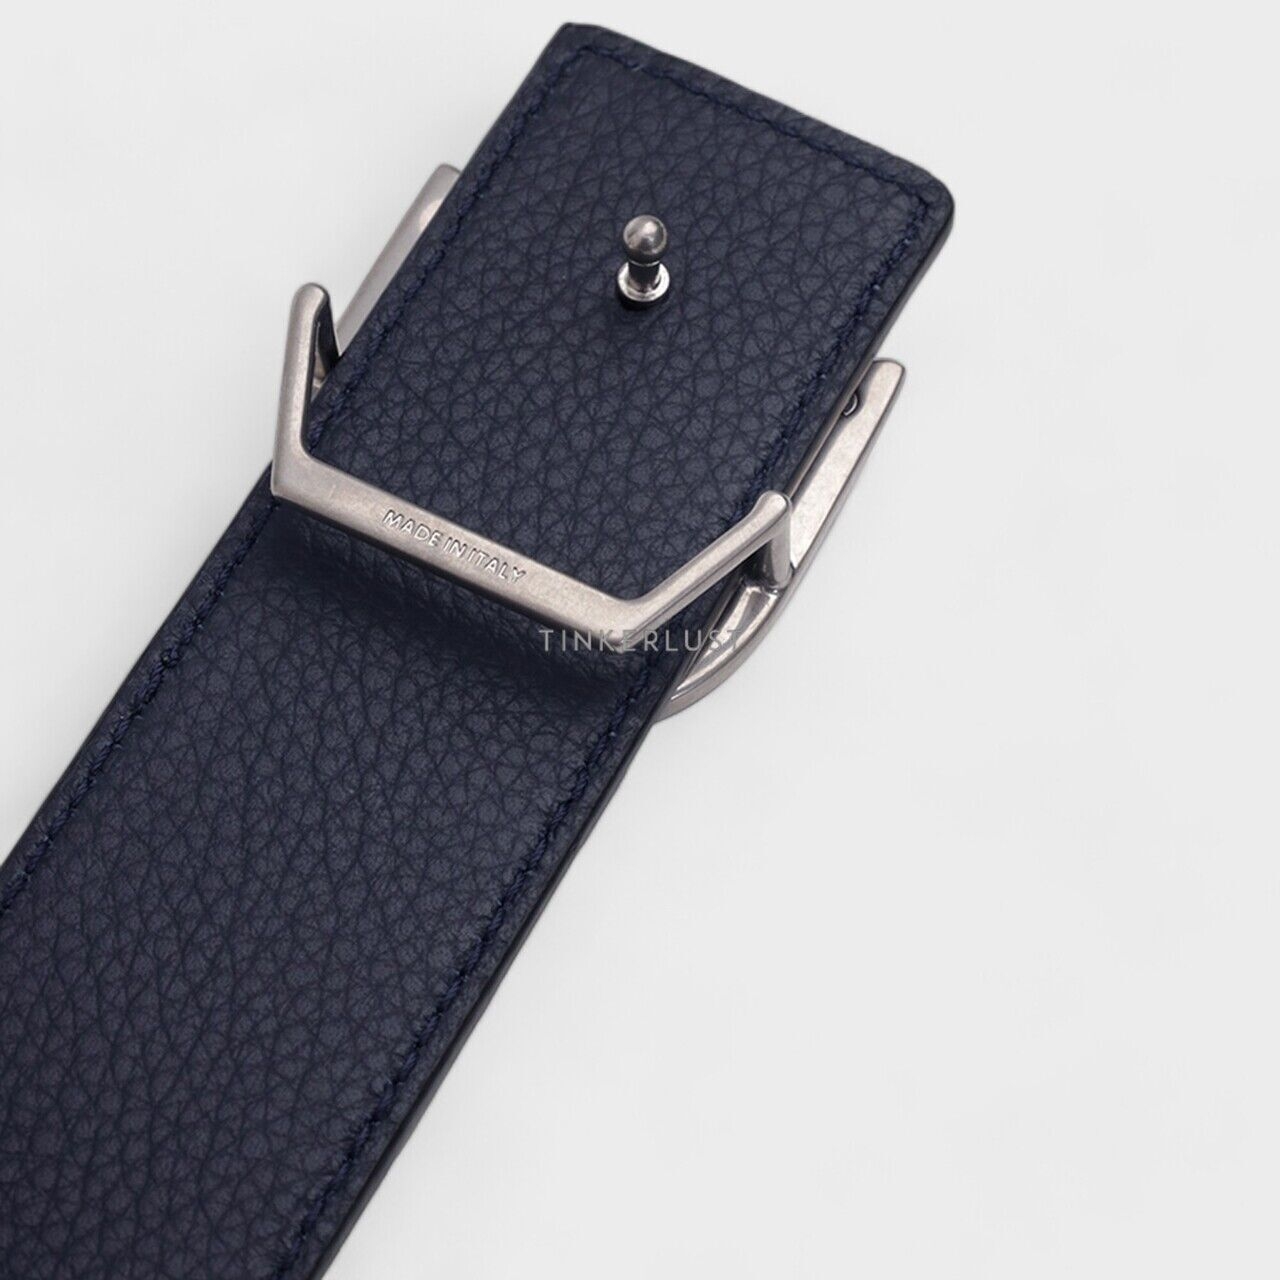 Christian Dior D Buckle Belt 35mm in Black/Navy Blue Grained Leather SHW